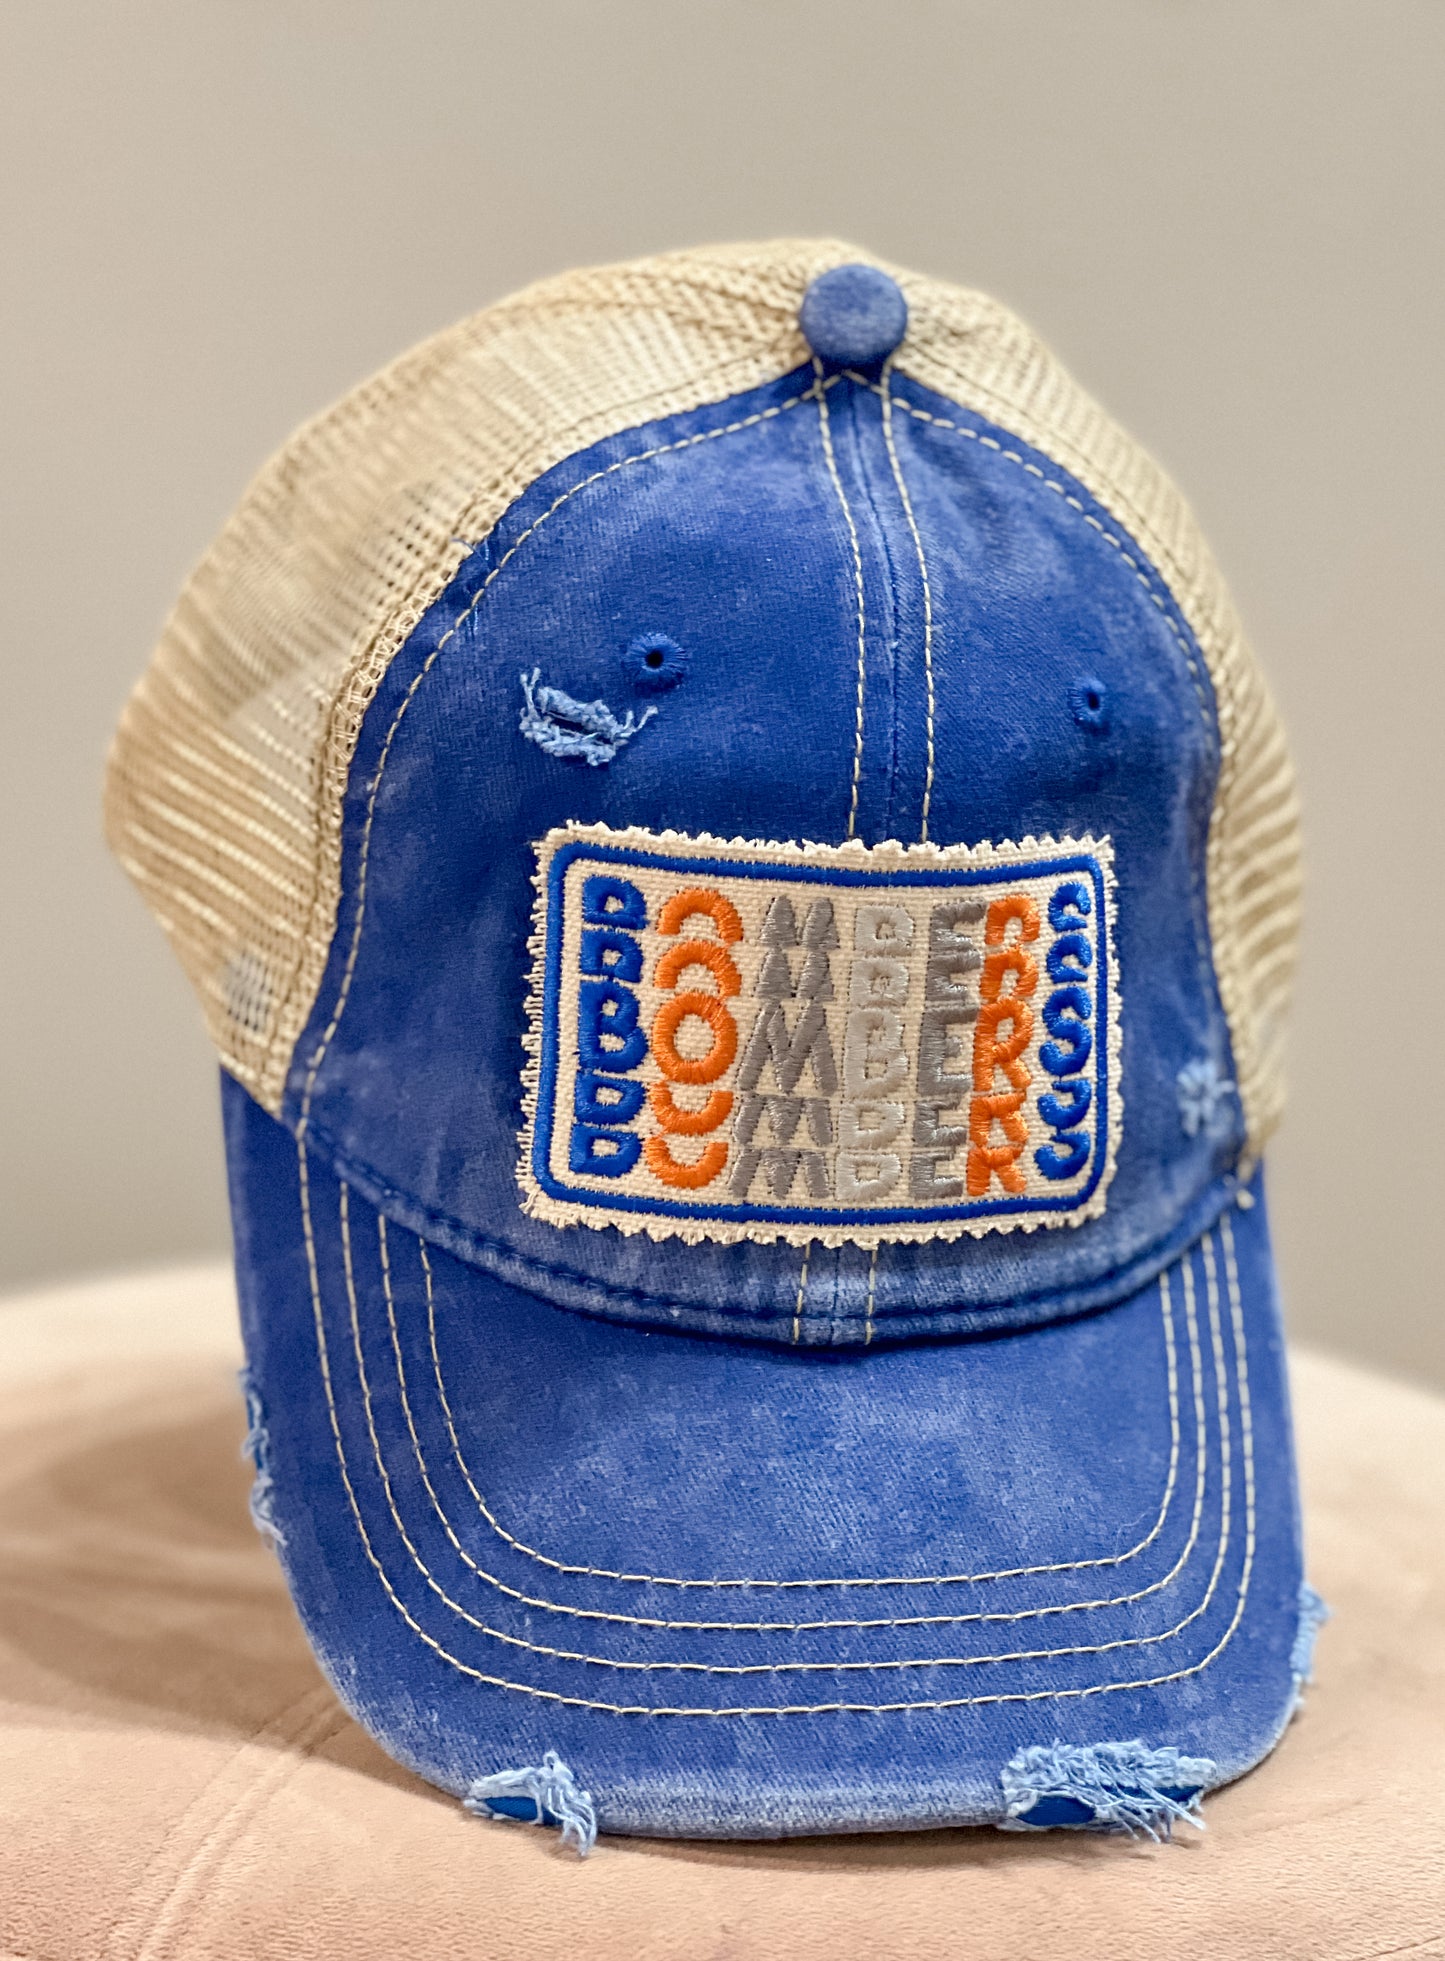 A-O Bombers adjustable hat